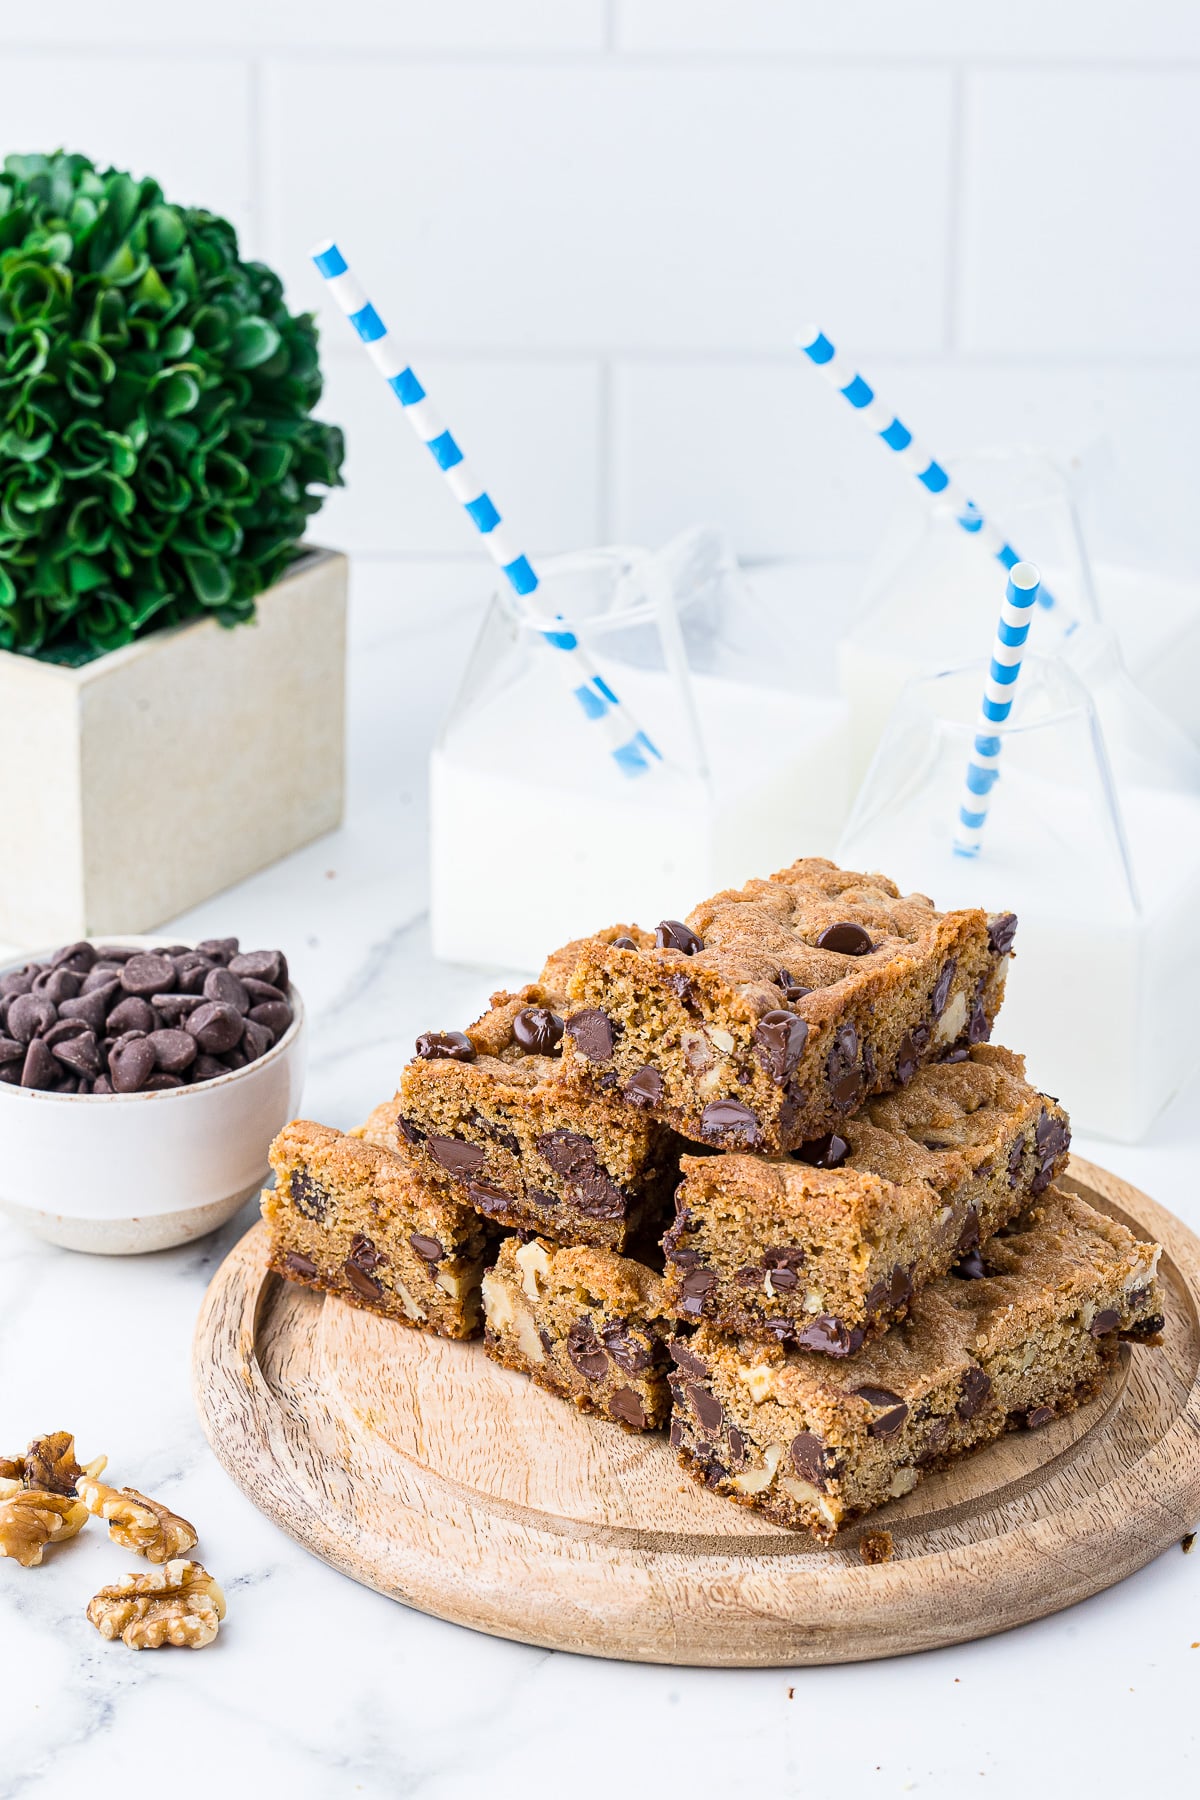 chocolate chip cookie bars on a wooden platter with milk in glass jars, a plant, and chocolate chips in the background, all on a white marble countertop